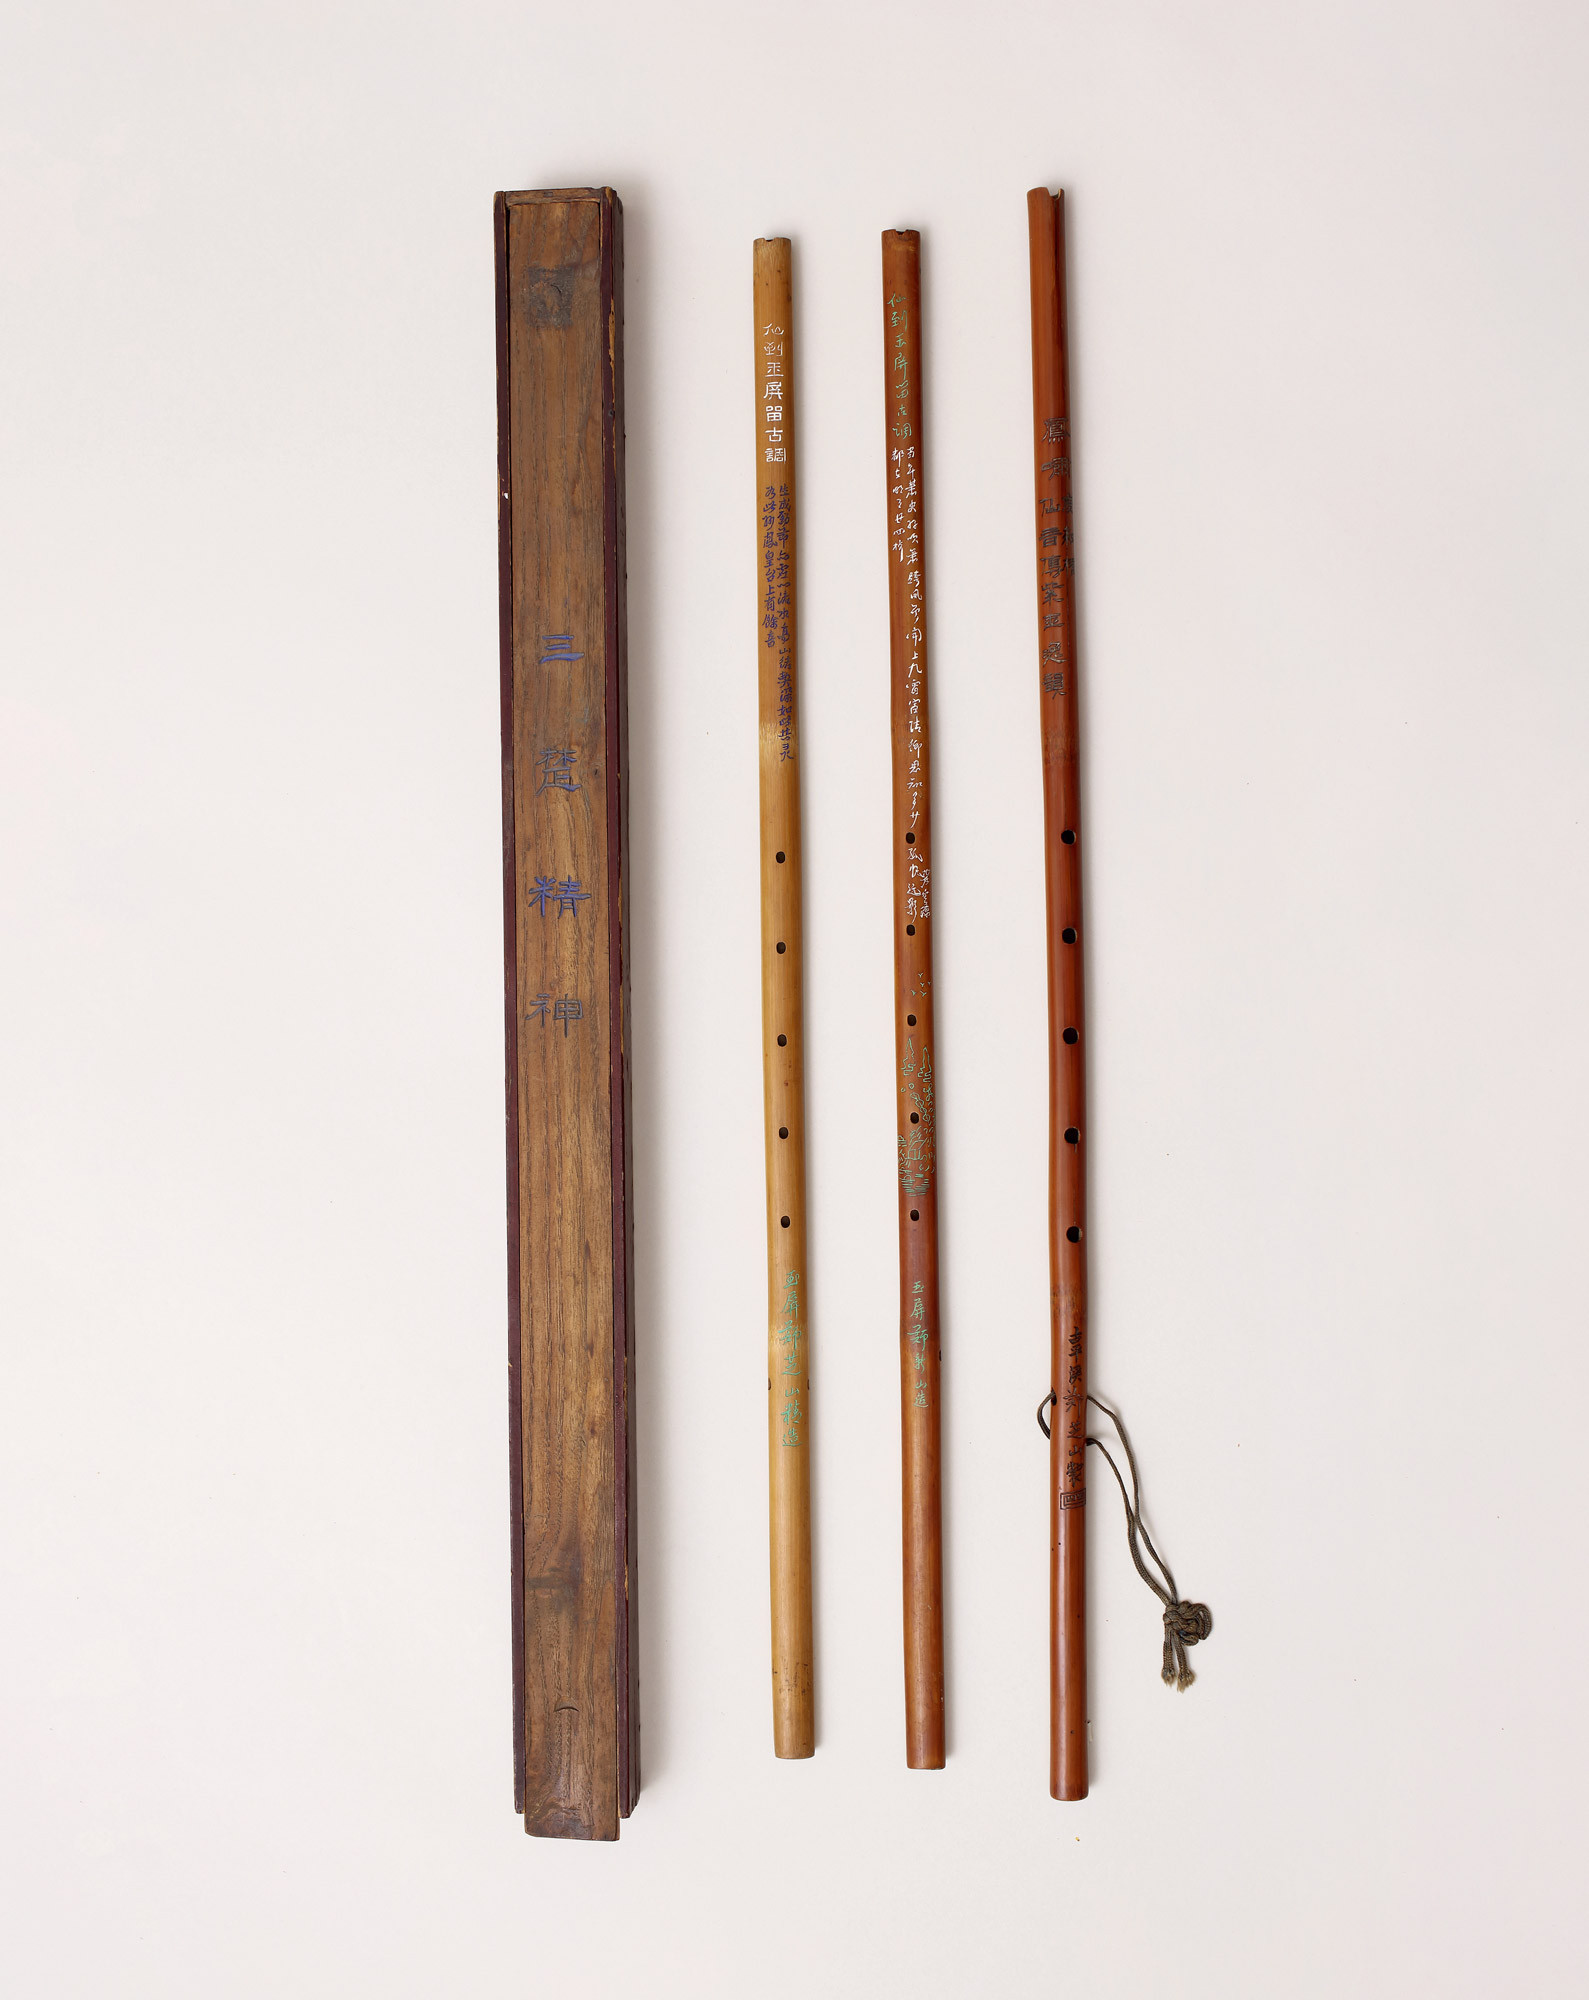 THREE PIECES OF YUPING MUSICAL INSTRUMENTS， XIAO